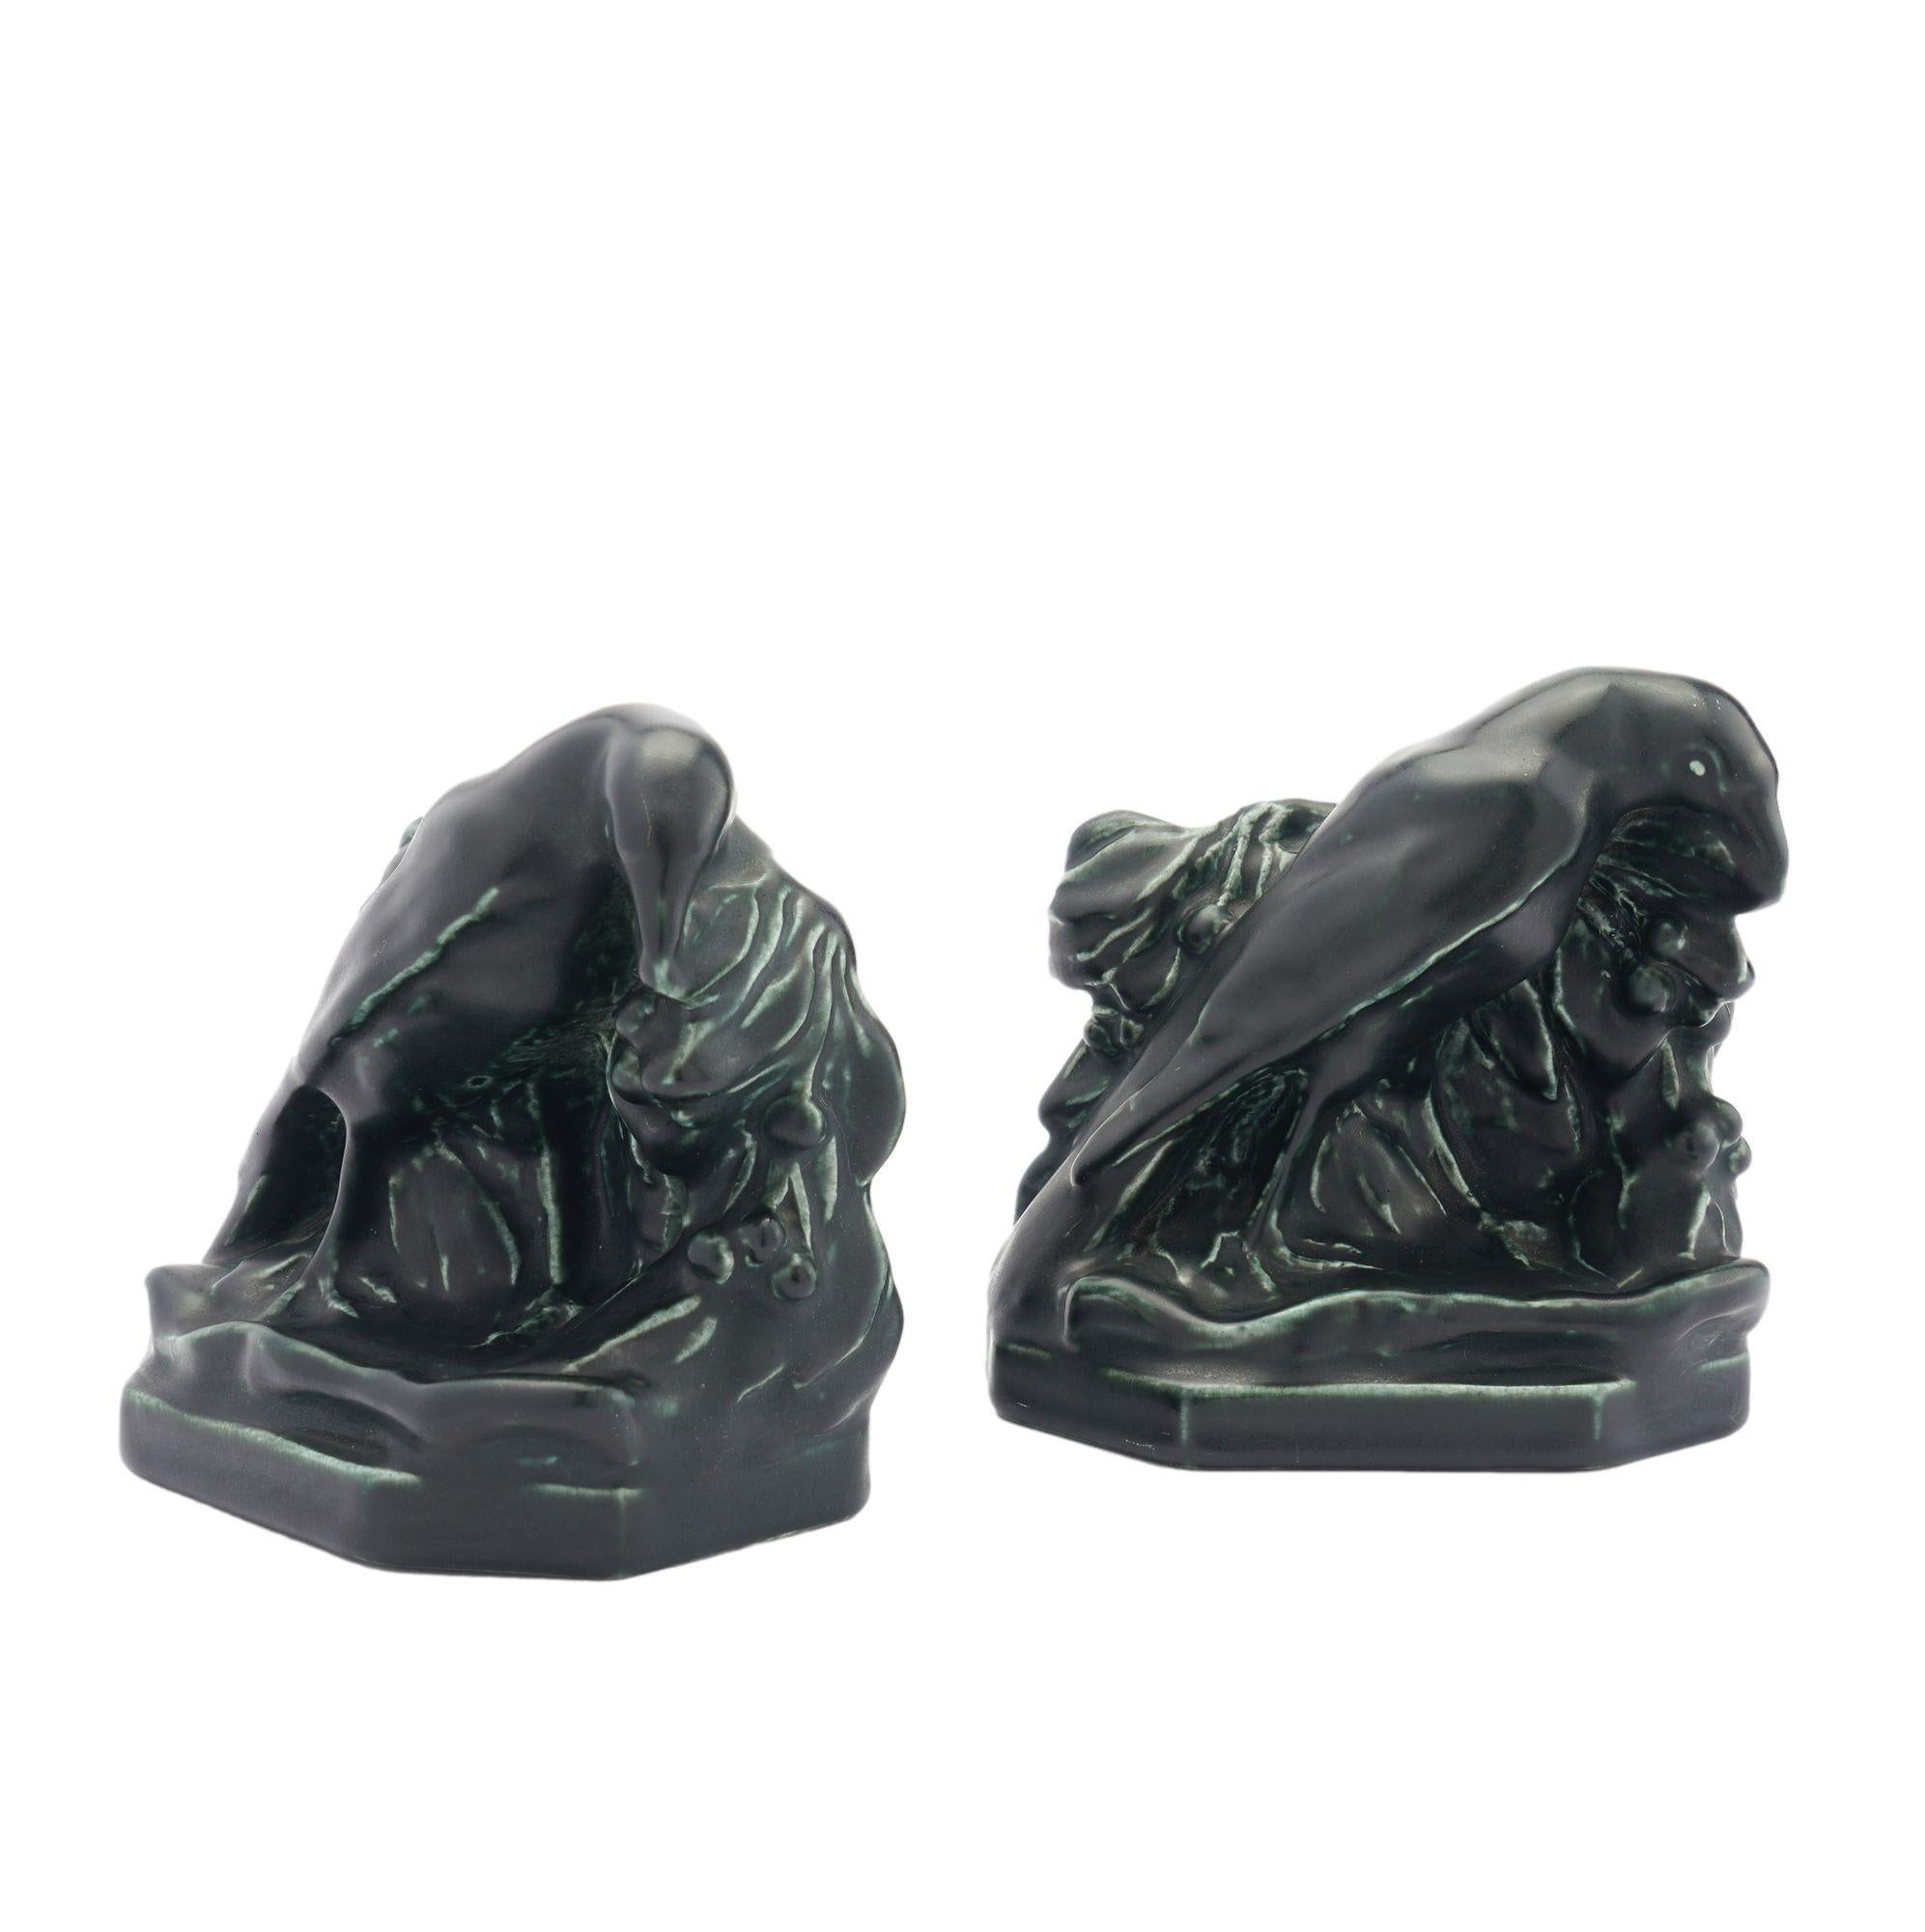 Pair of matte black glazed ceramic bookends of a raven surrounded by leaves. Designed by William Purcell McDonald.
Stamped on the underside: XXIX, 2275

Cincinnati, Ohio, 1929.